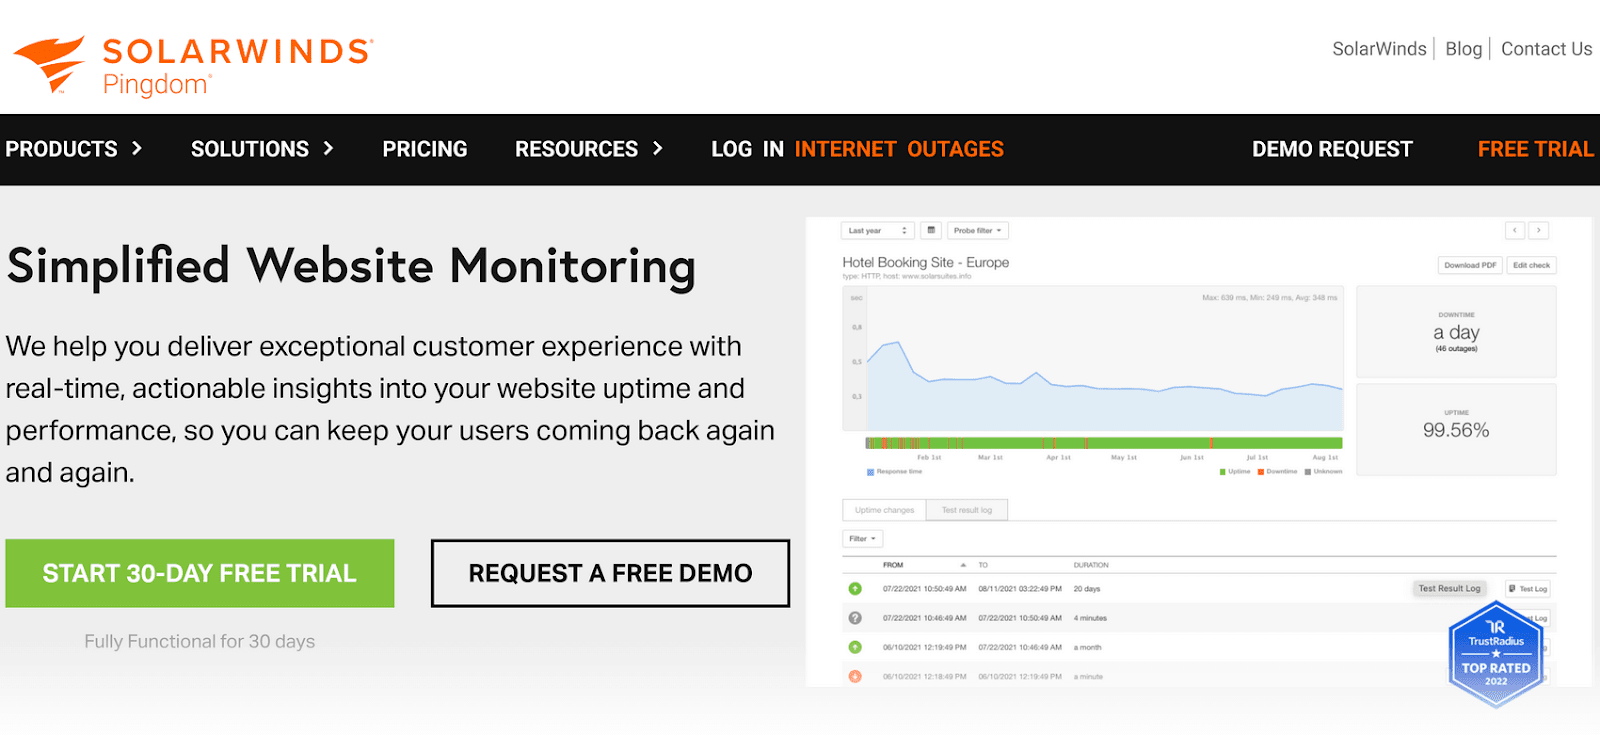 The SolarWinds Pingdom homepage advertising simplified website monitoring with a green "Start 30-Day Free Trial" button.